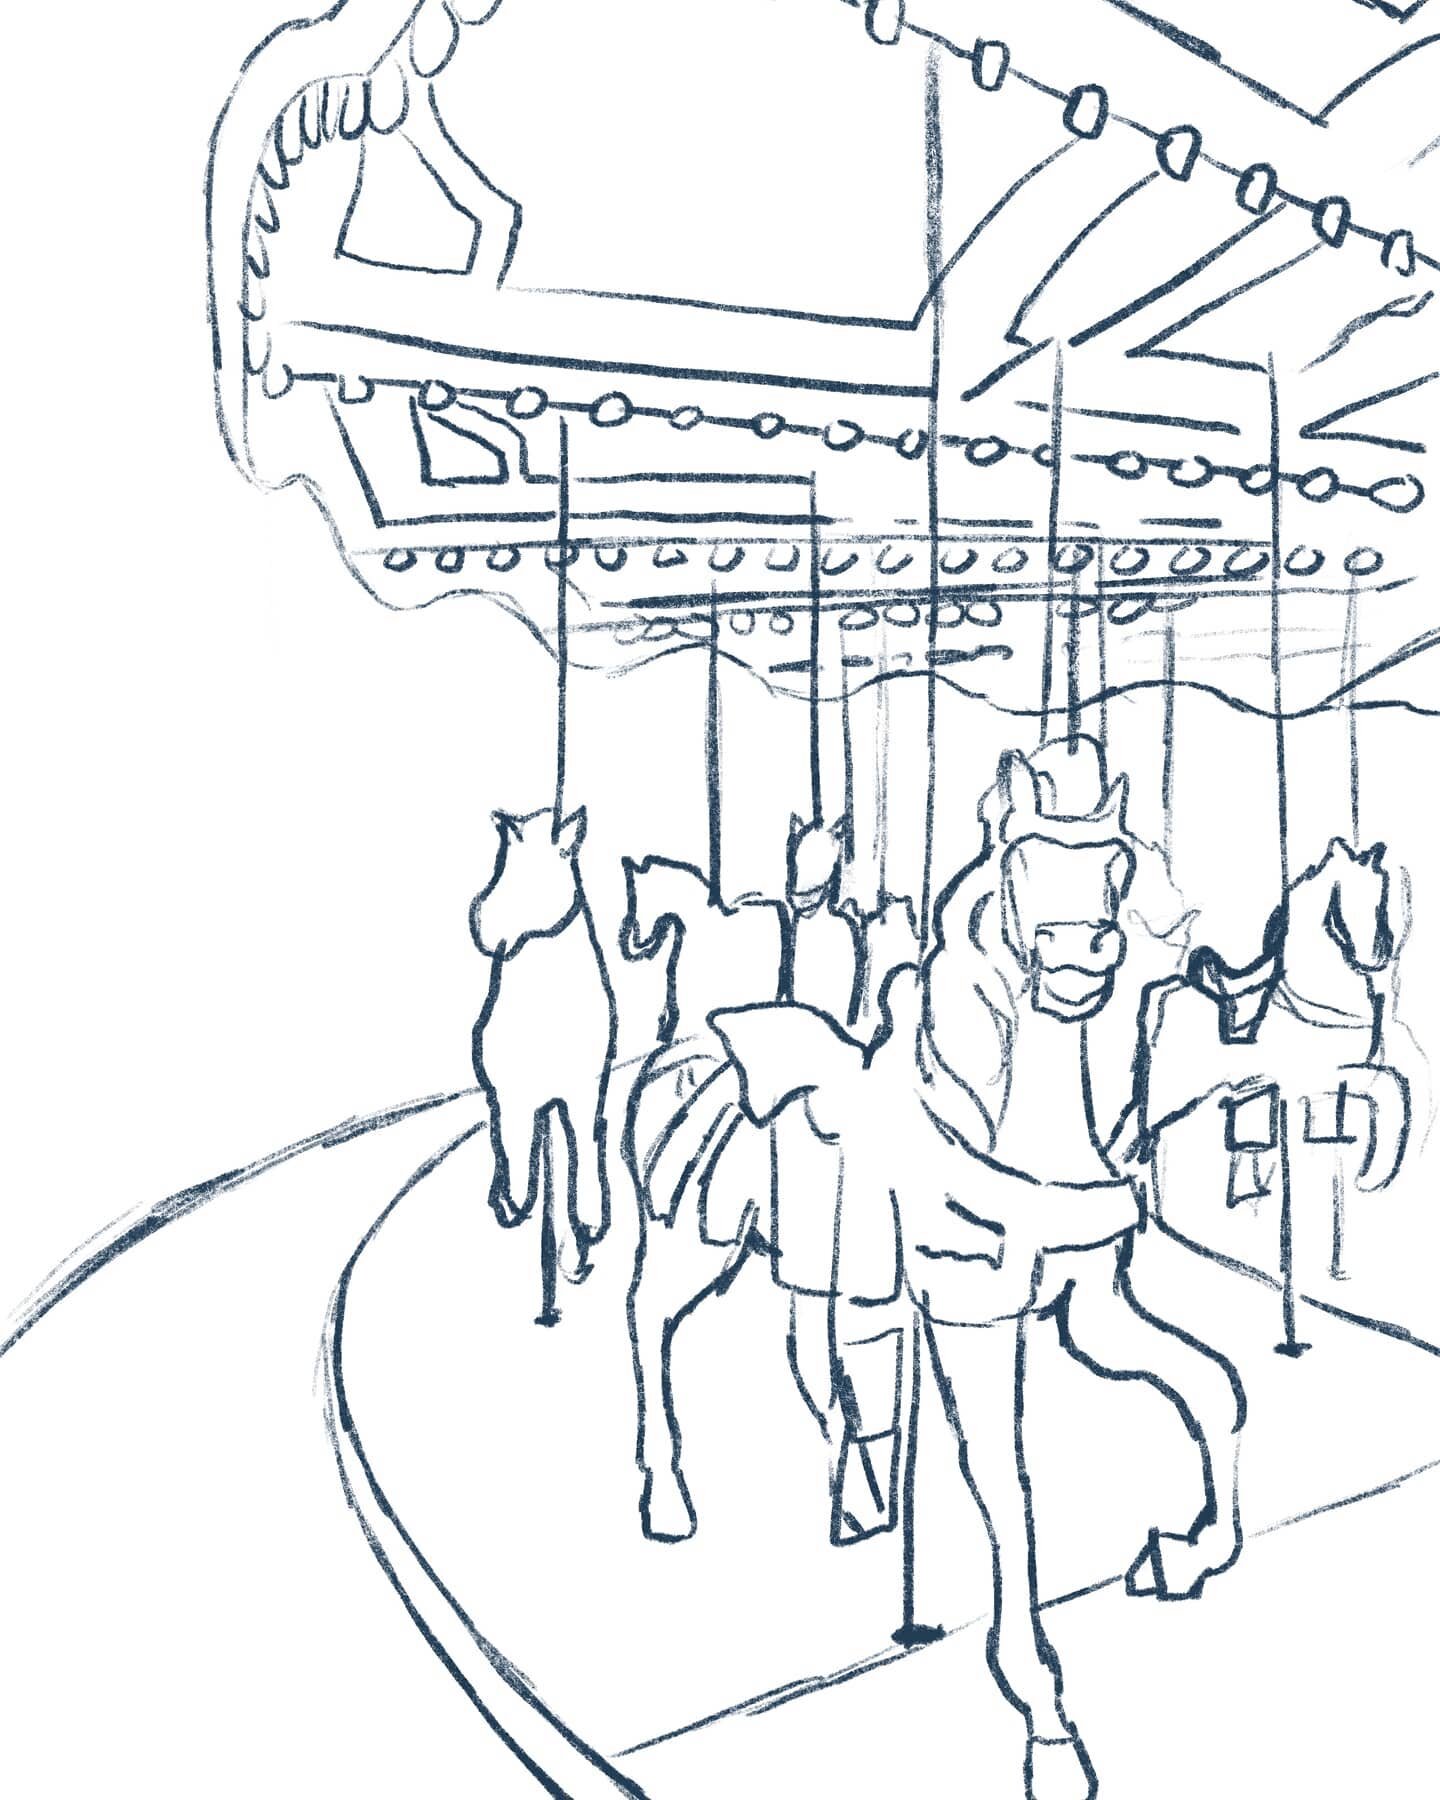 Starting with digital sketches lately to help layout a &quot;new&quot; painting series. 

...adding to my carnival/fair idea.

Here's the first of two carousel paintings. 

#only1joeyart #only1joey #art #artist #artistofyork #yoco #yorkmakesart #york